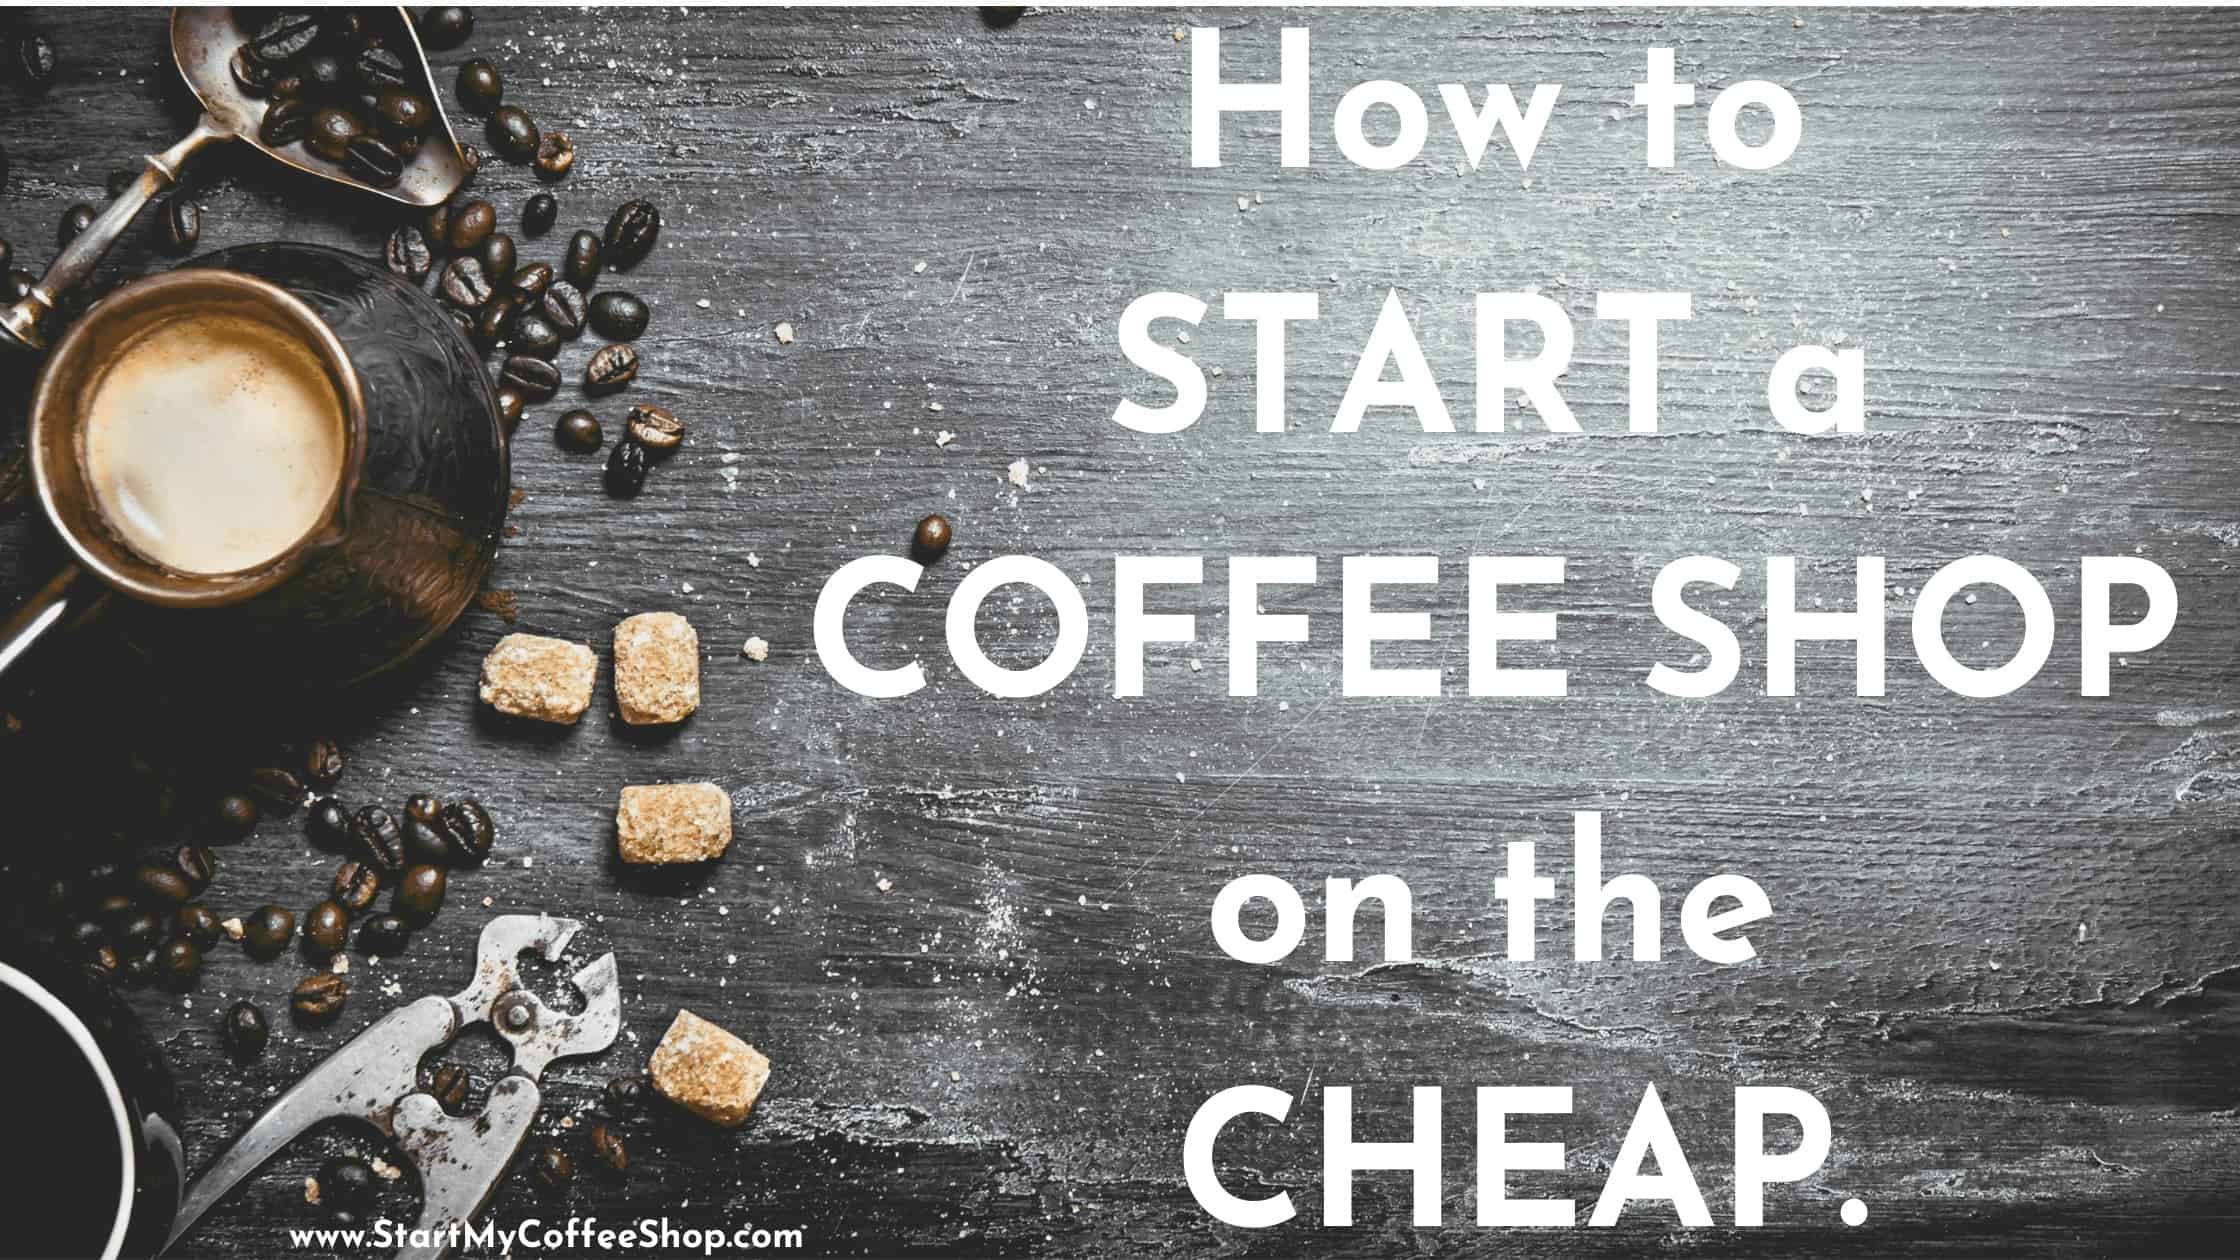 How to Start A Coffee Shop on the Cheap.